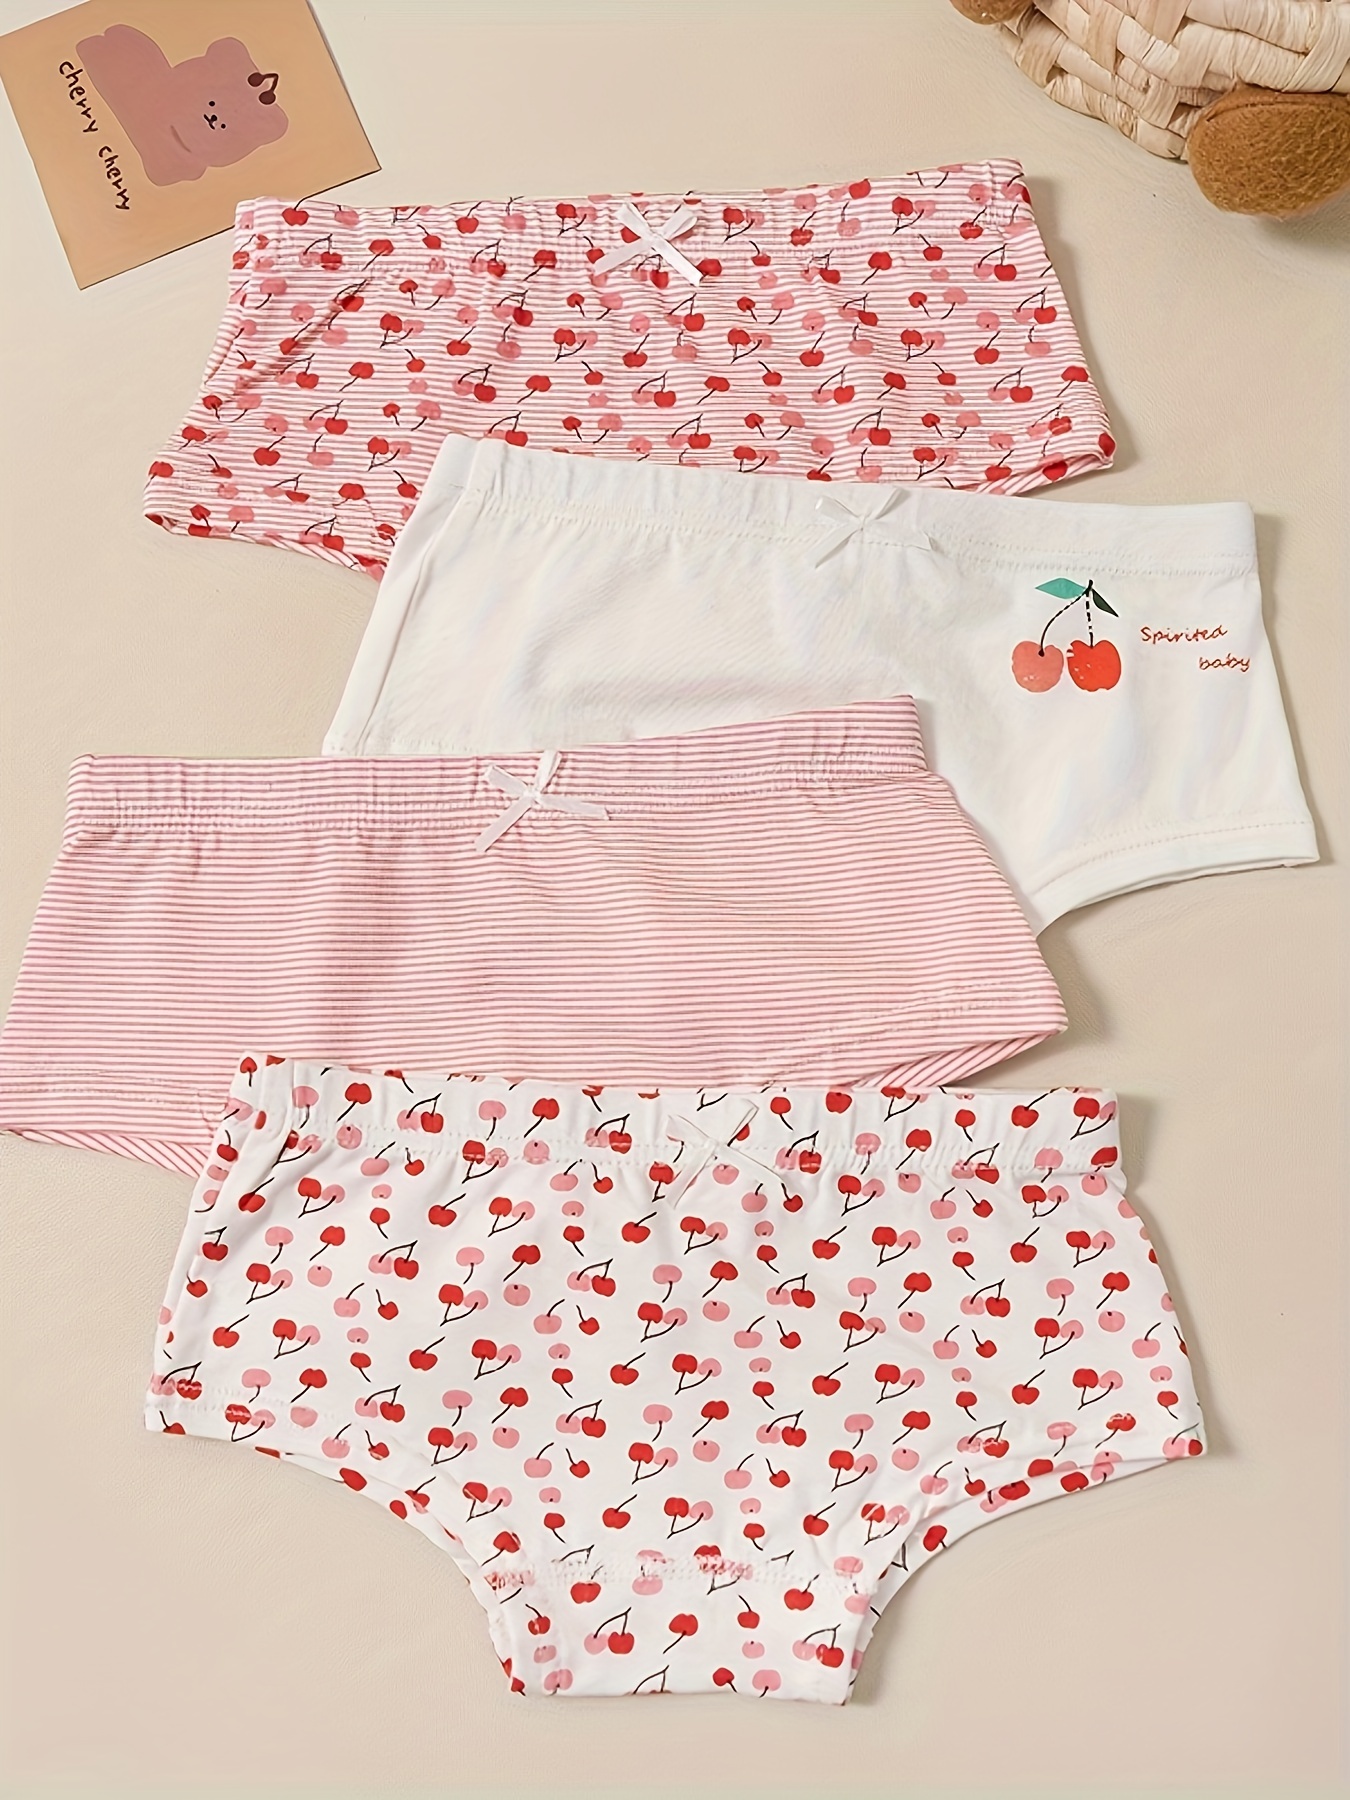 4pcs Comfortable Cotton Underwear for Girls Over 8 Years Old Hipster  Underpants 